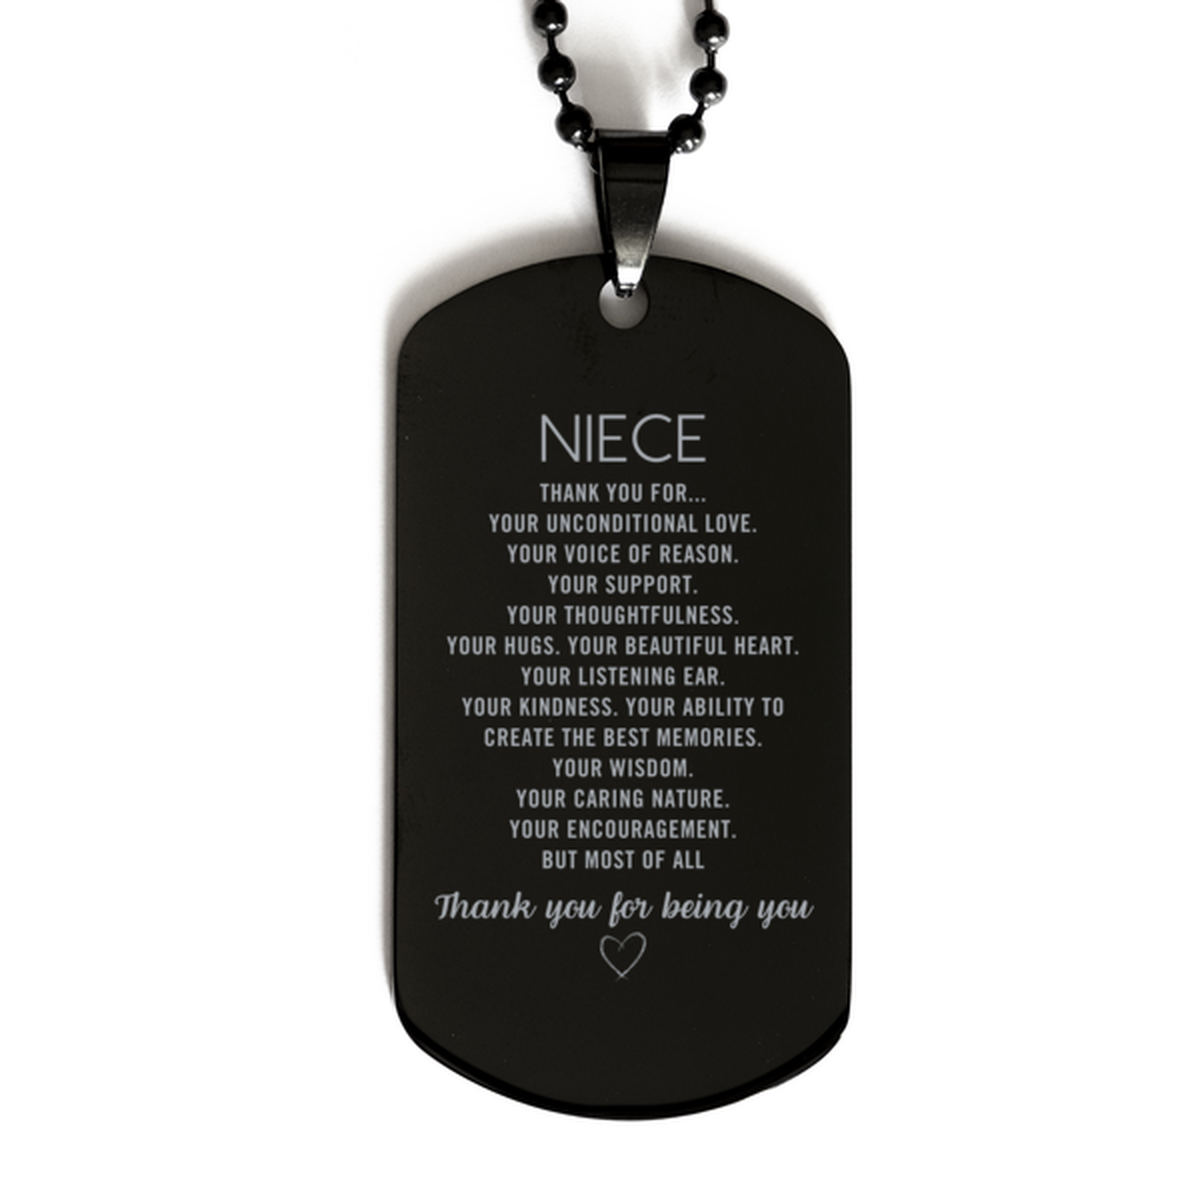 Niece Black Dog Tag Custom, Engraved Gifts For Niece Christmas Graduation Birthday Gifts for Men Women Niece Thank you for Your unconditional love